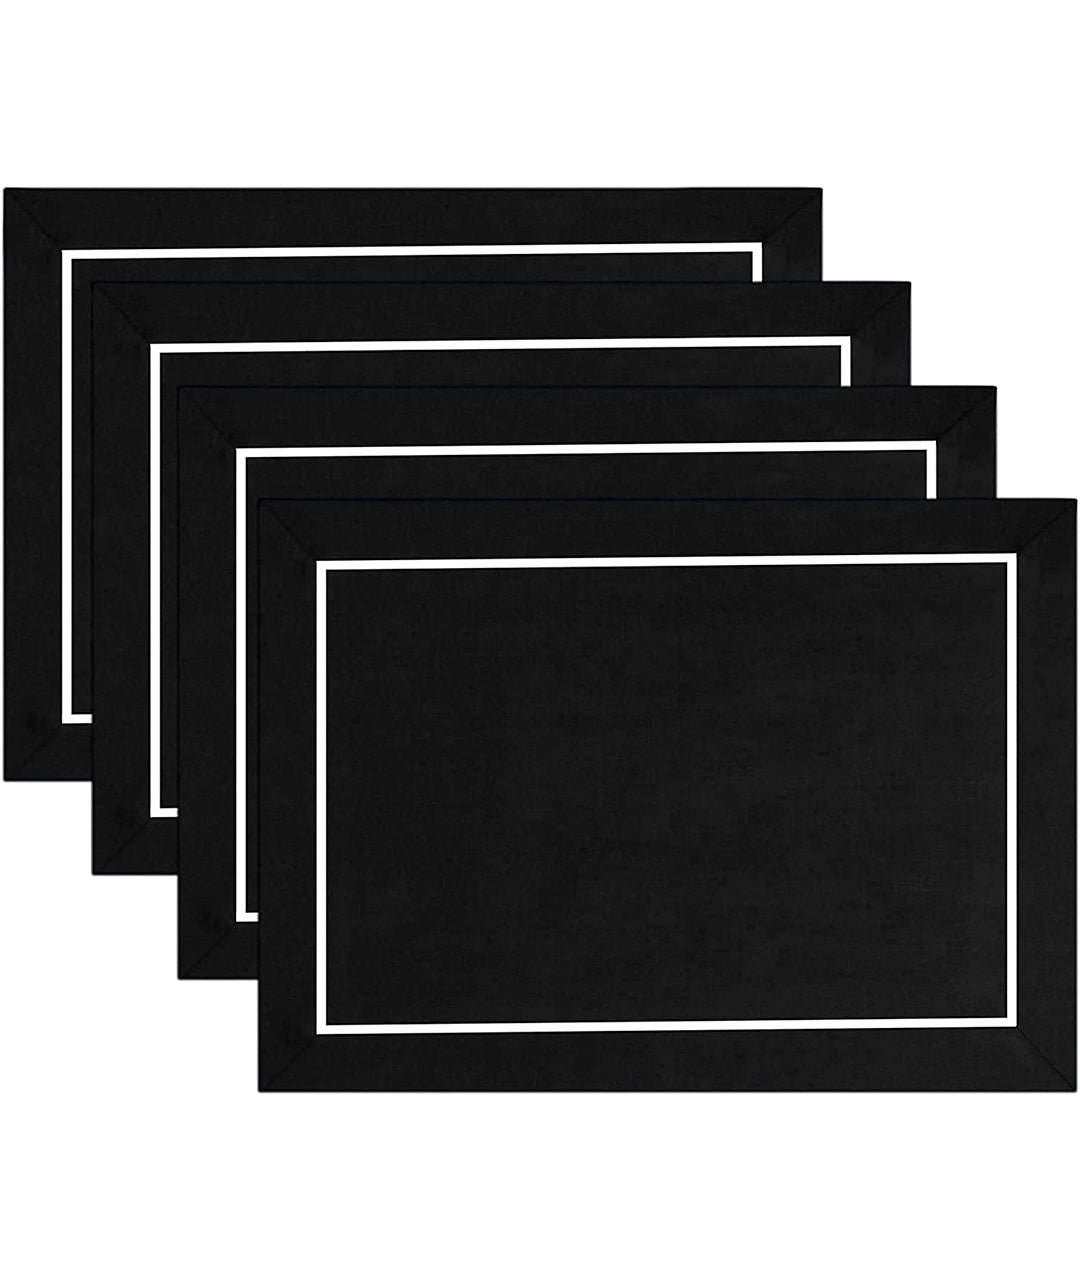 Black & White Linen Placemats 14 x 19 Inch Set of 4 - Reversible